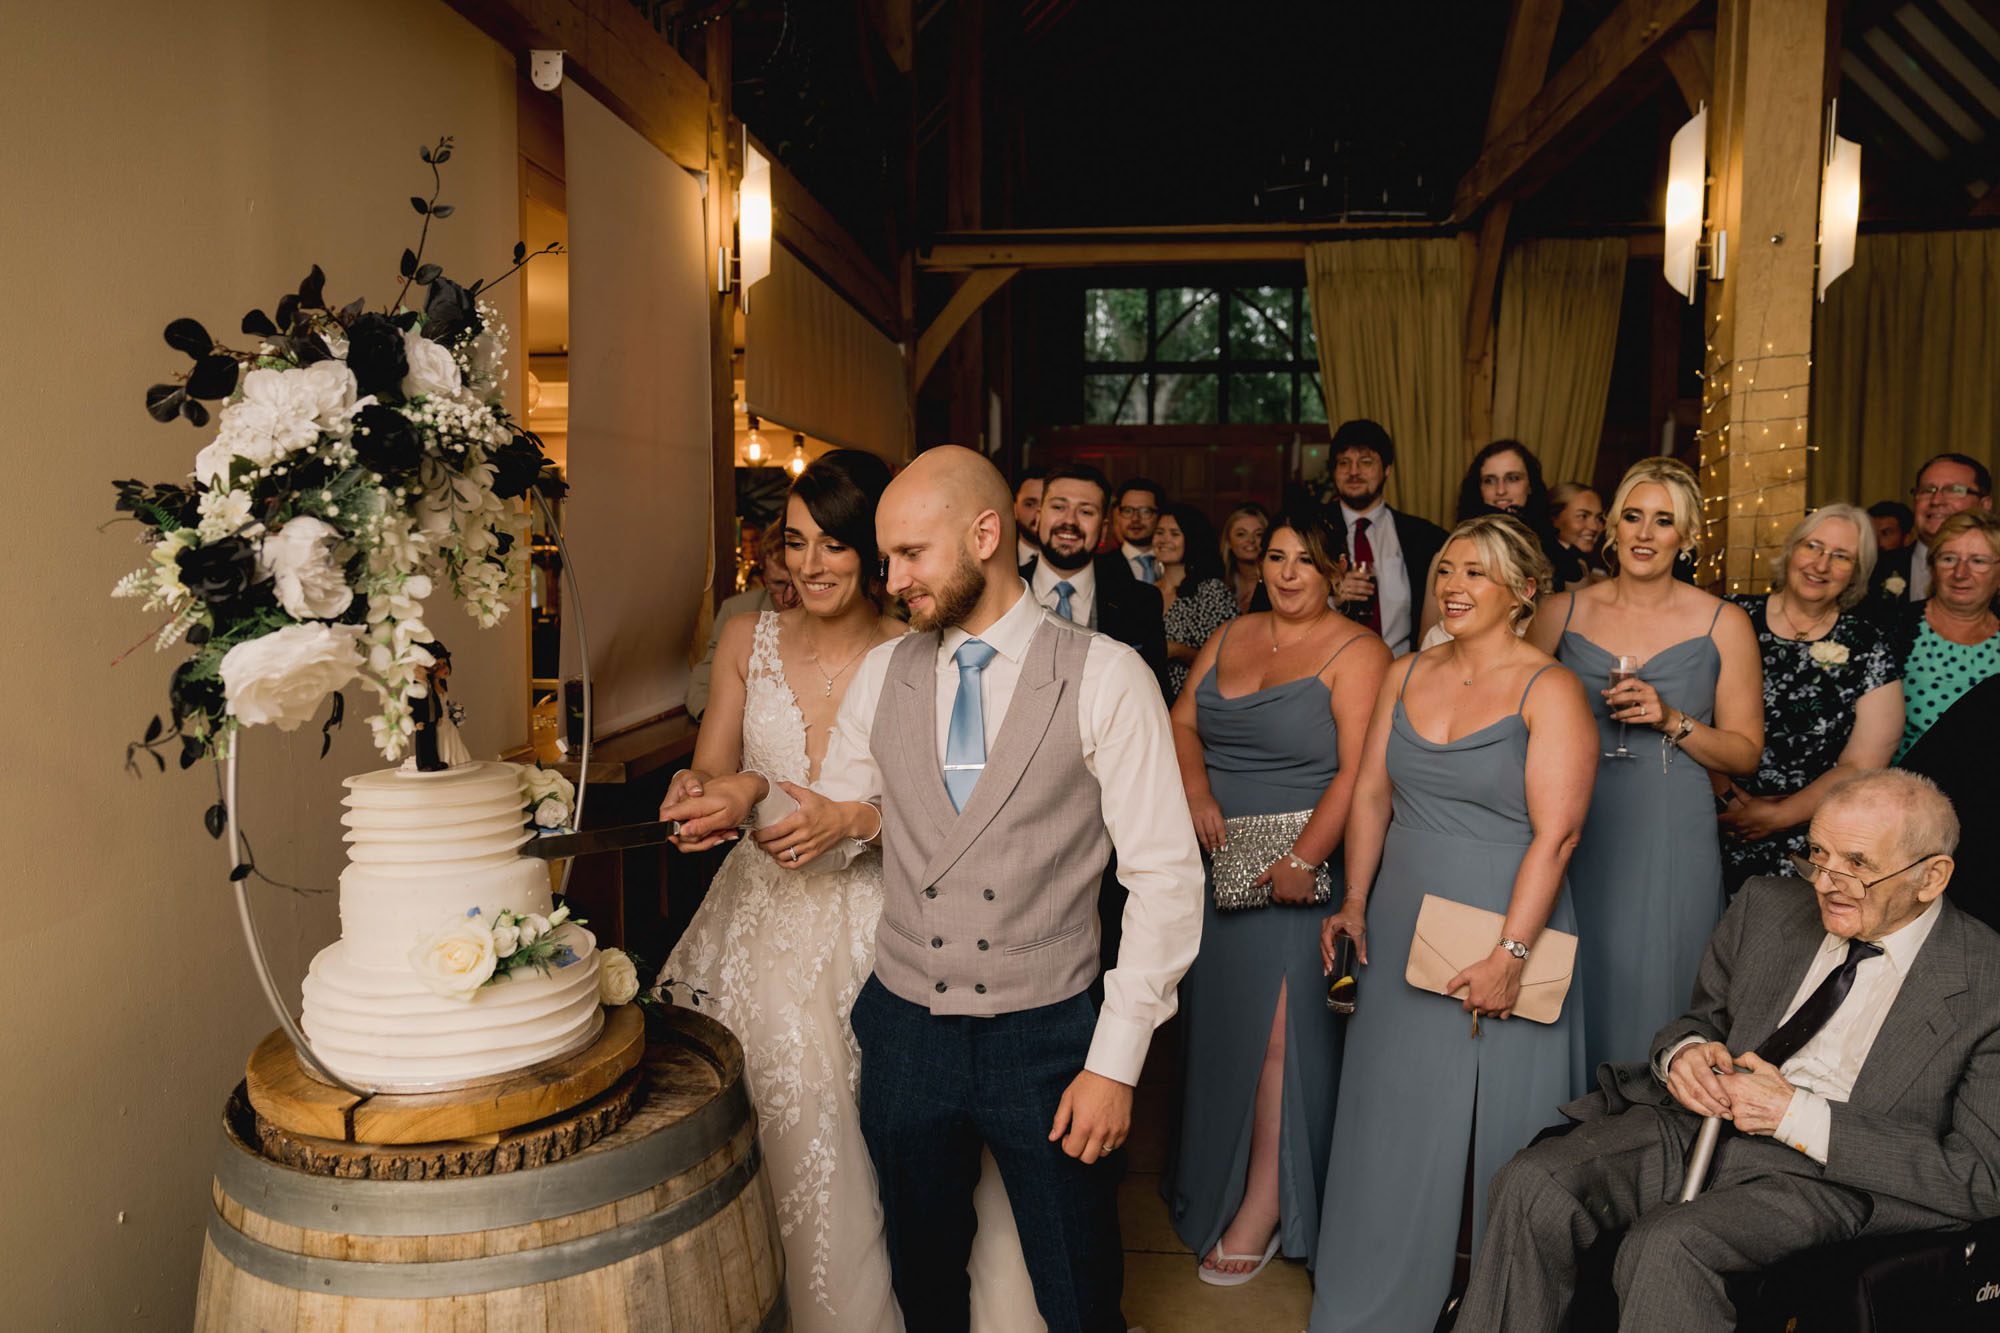 Bride and groom cut their wedding cake at Rivervale Barn in Hampshire.